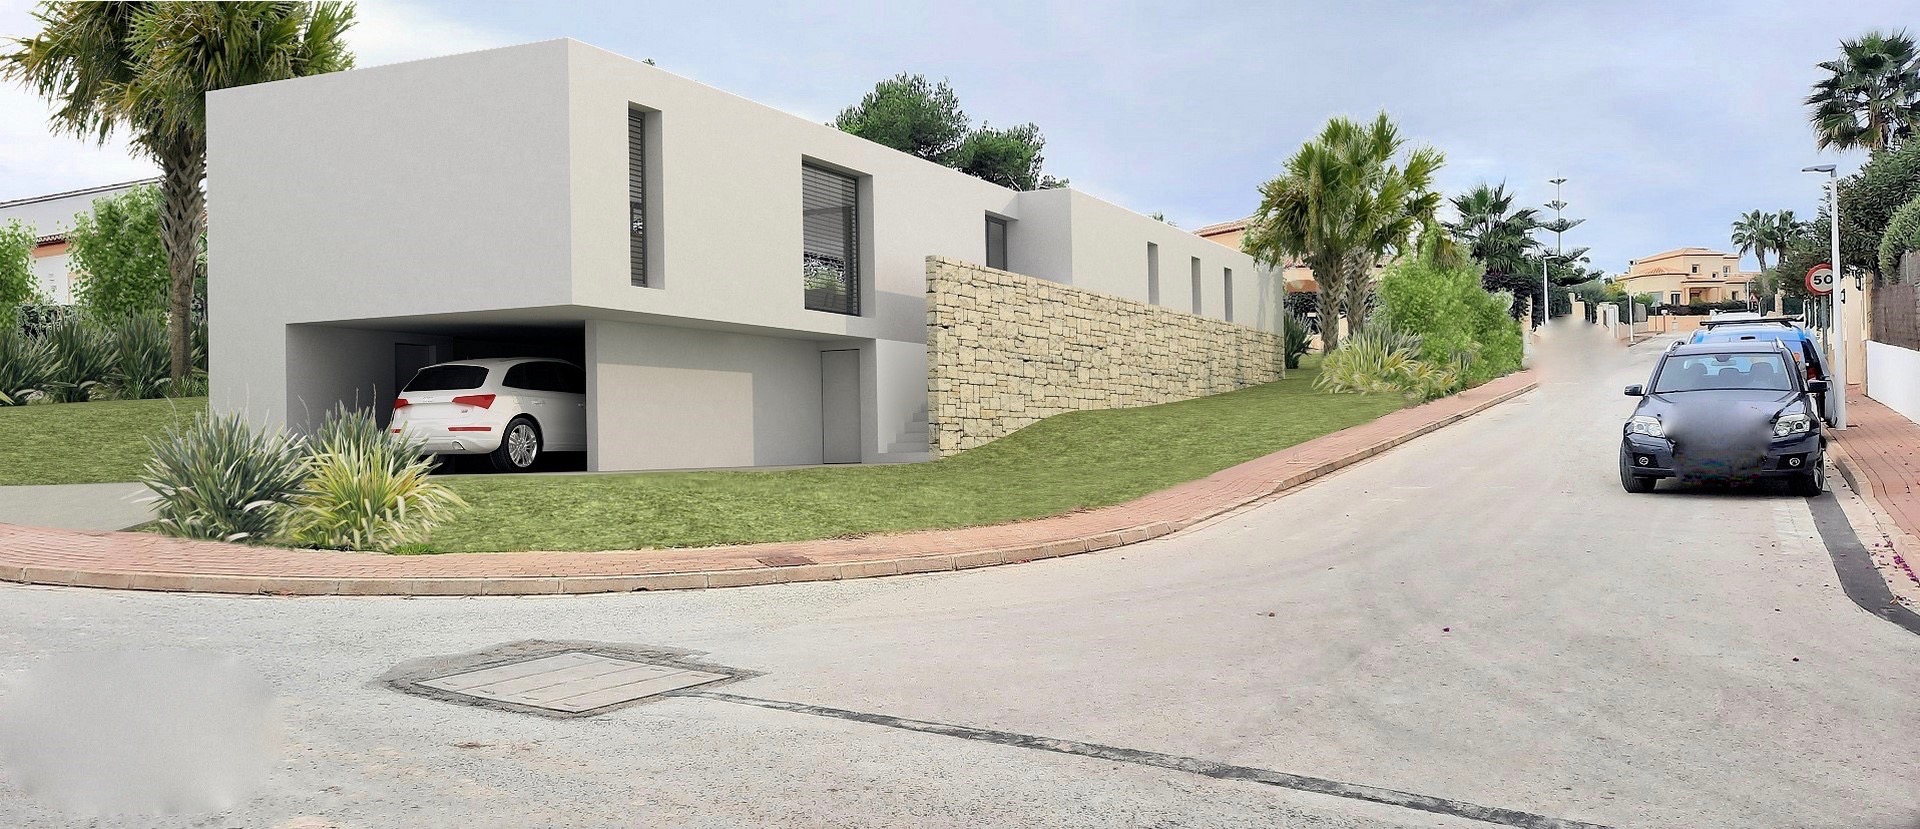 Plot for sale ready to build with license and approved project in Las Laderas - Javea